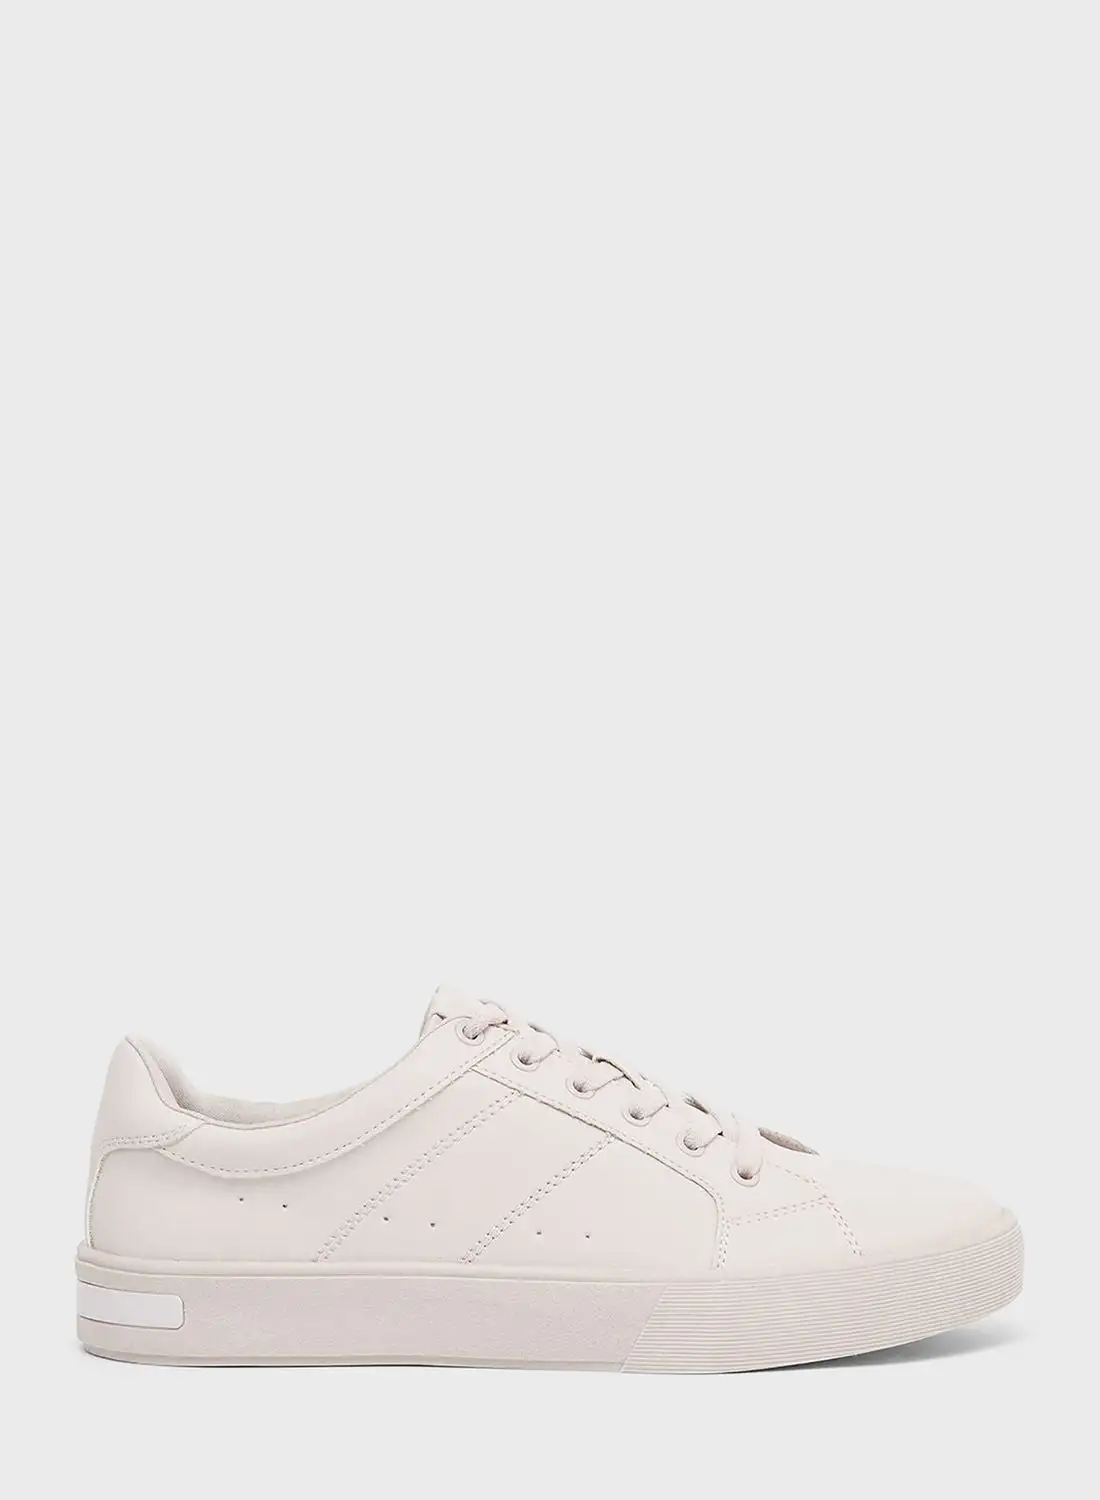 CALL IT SPRING Casual Lace-Up Sneakers